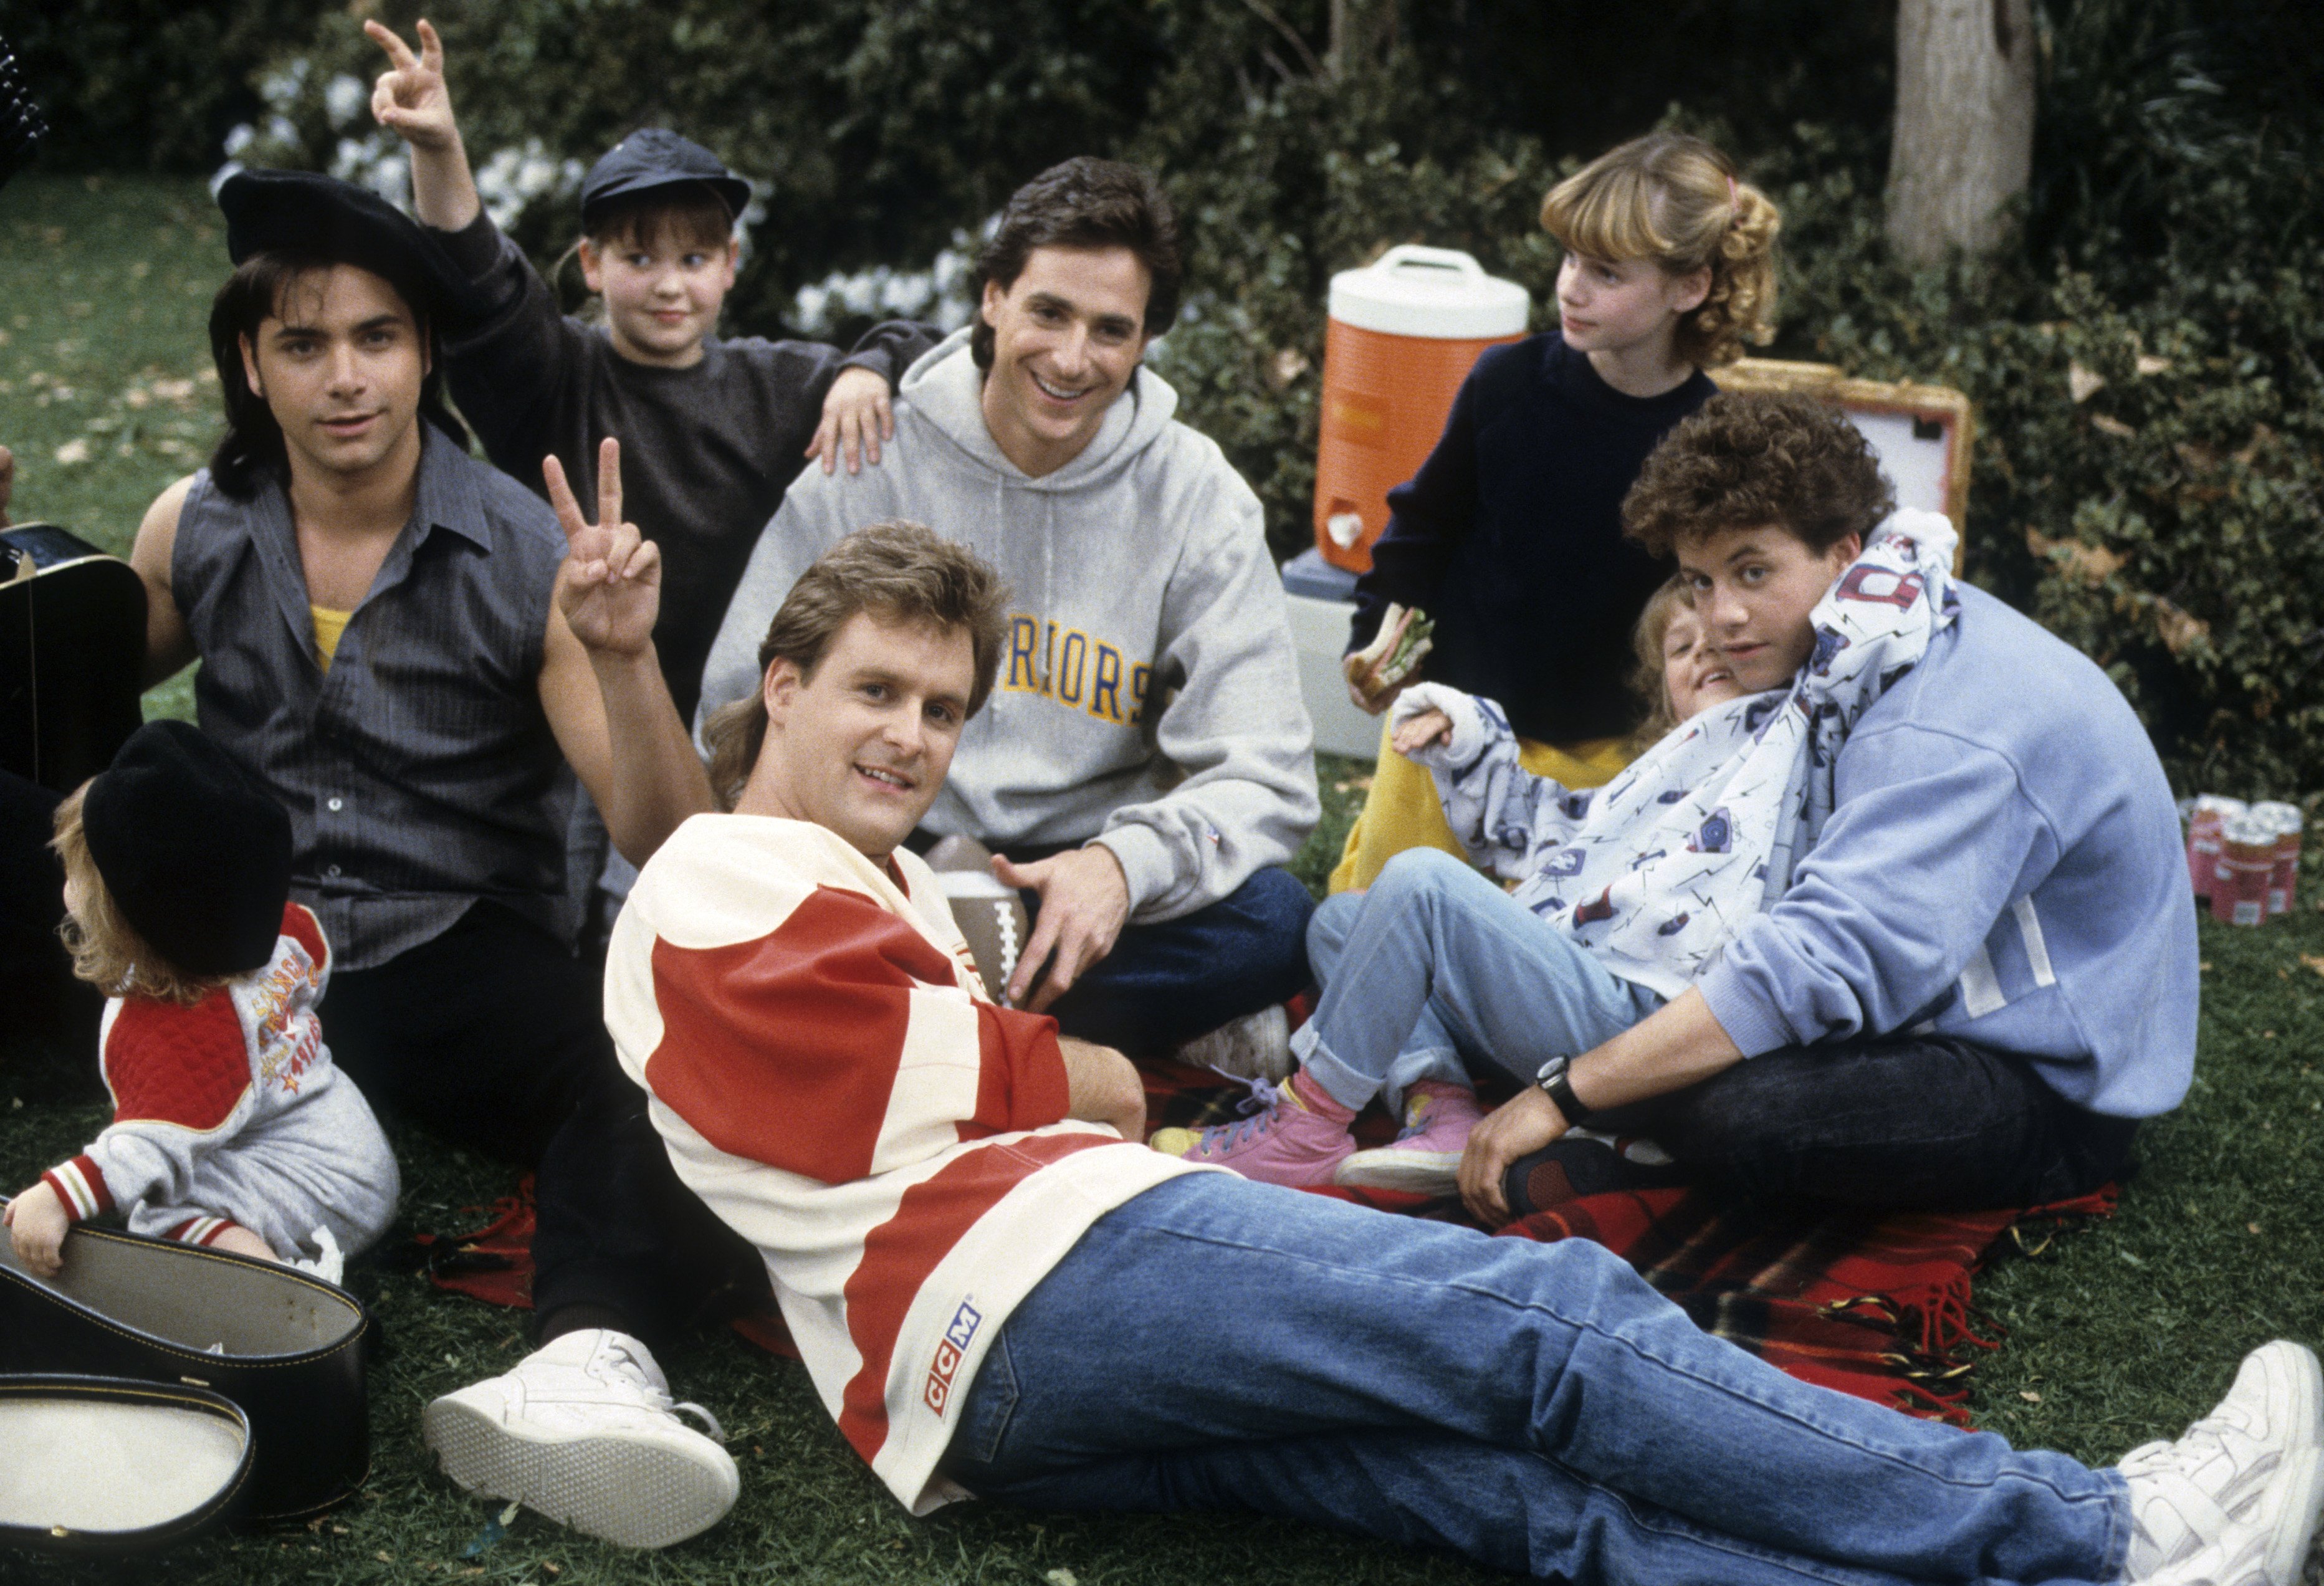 Candace Cameron Bure and Kirk Cameron on the set of "Full House" with their co-stars in 1988 | Source: Getty Images 